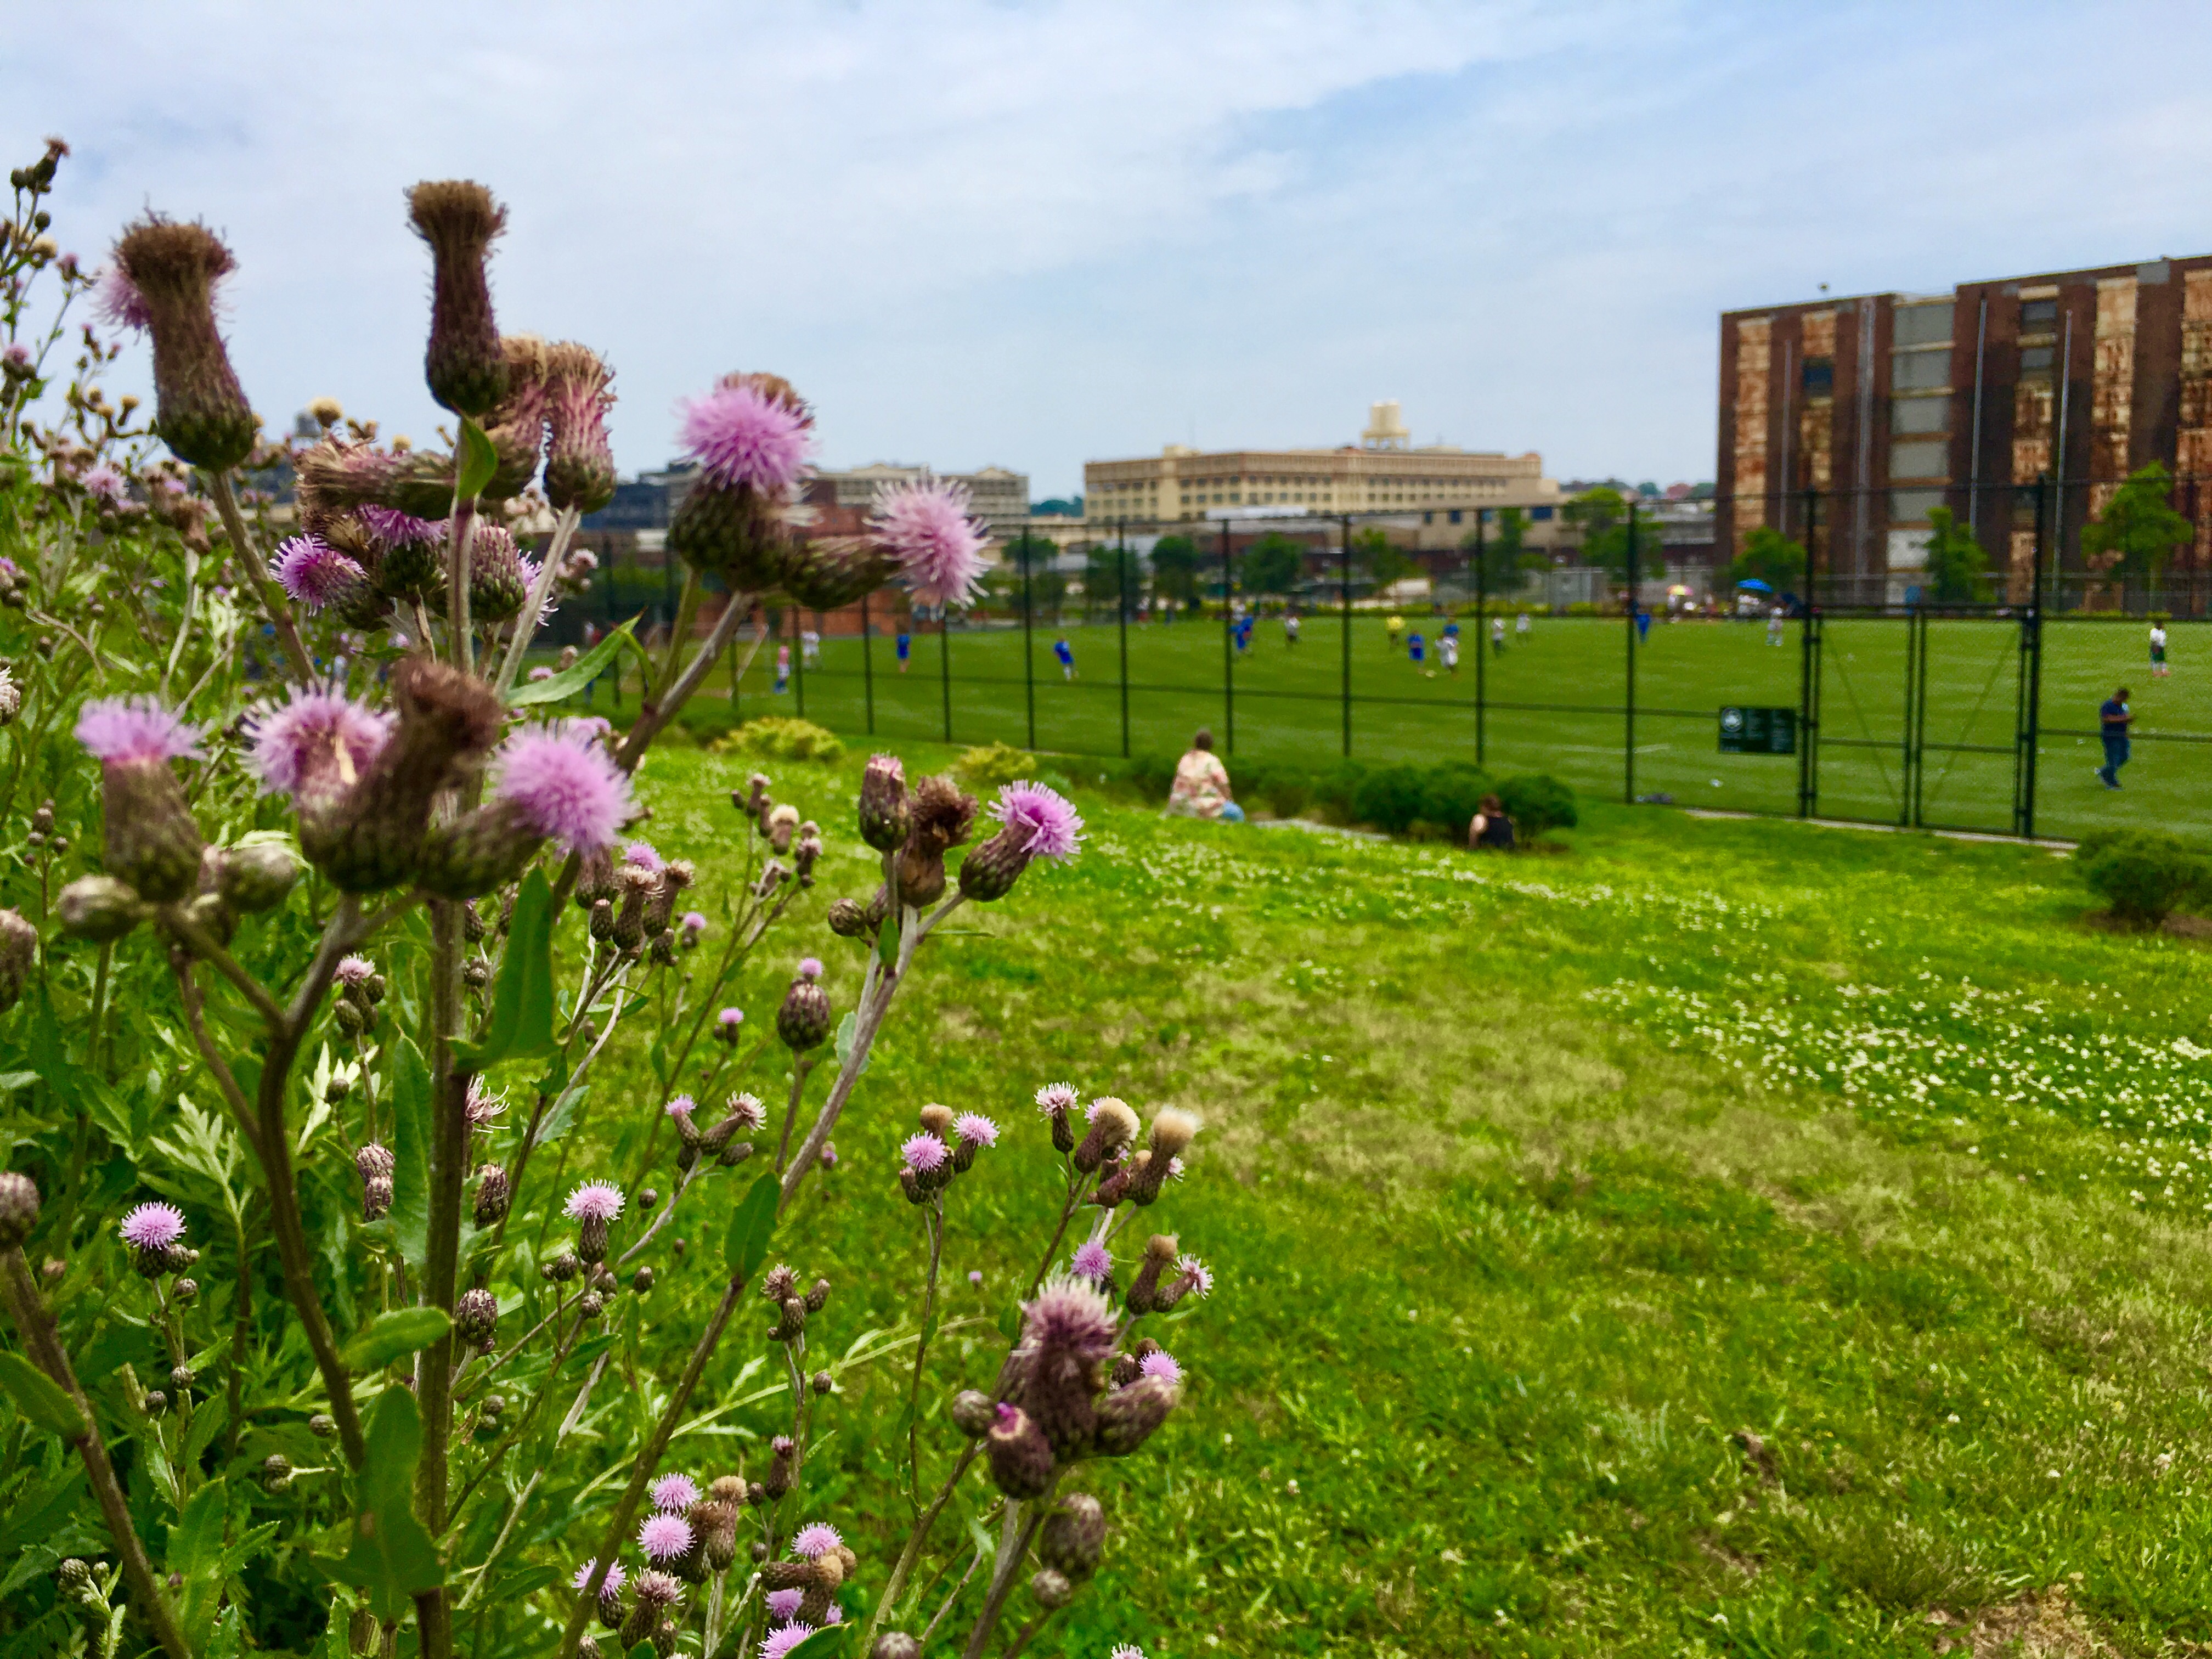 Look but don’t touch. Sharp thistles frame a view of sports fields at Bush Terminal Park. Eagle photo by Lore Croghan